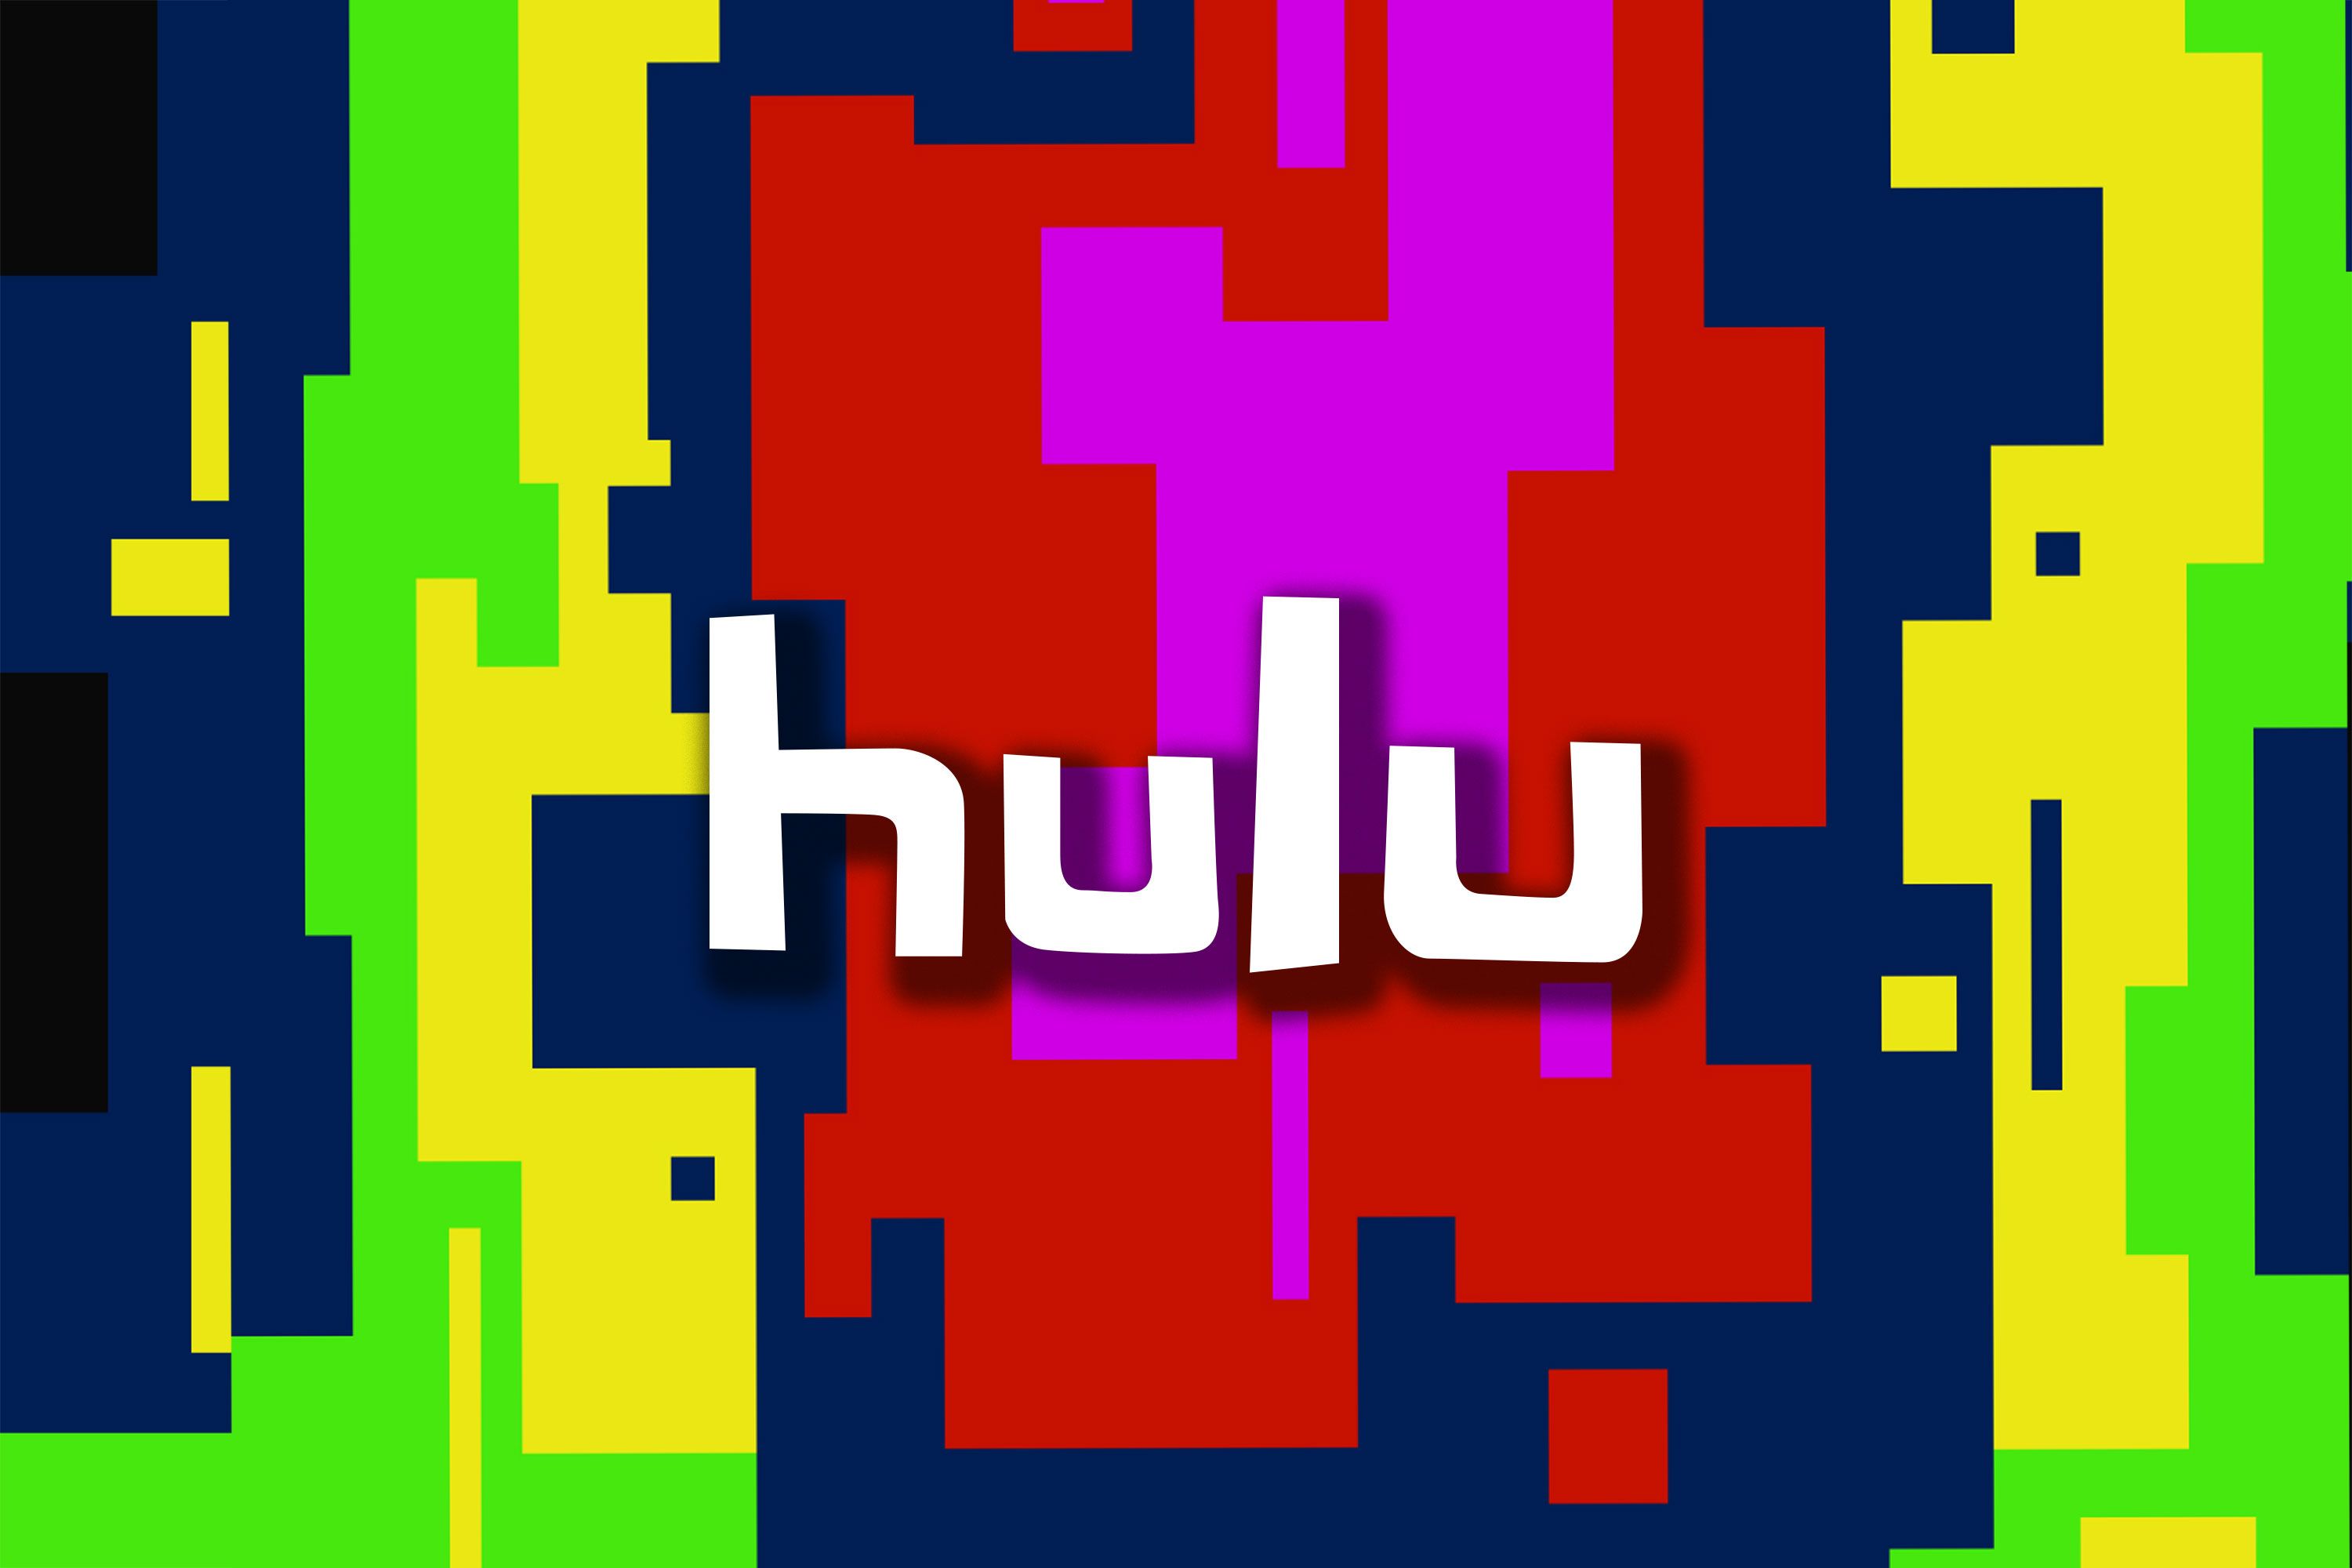 10 Hulu Hacks, Tips, and Tricks for the Streaming Service